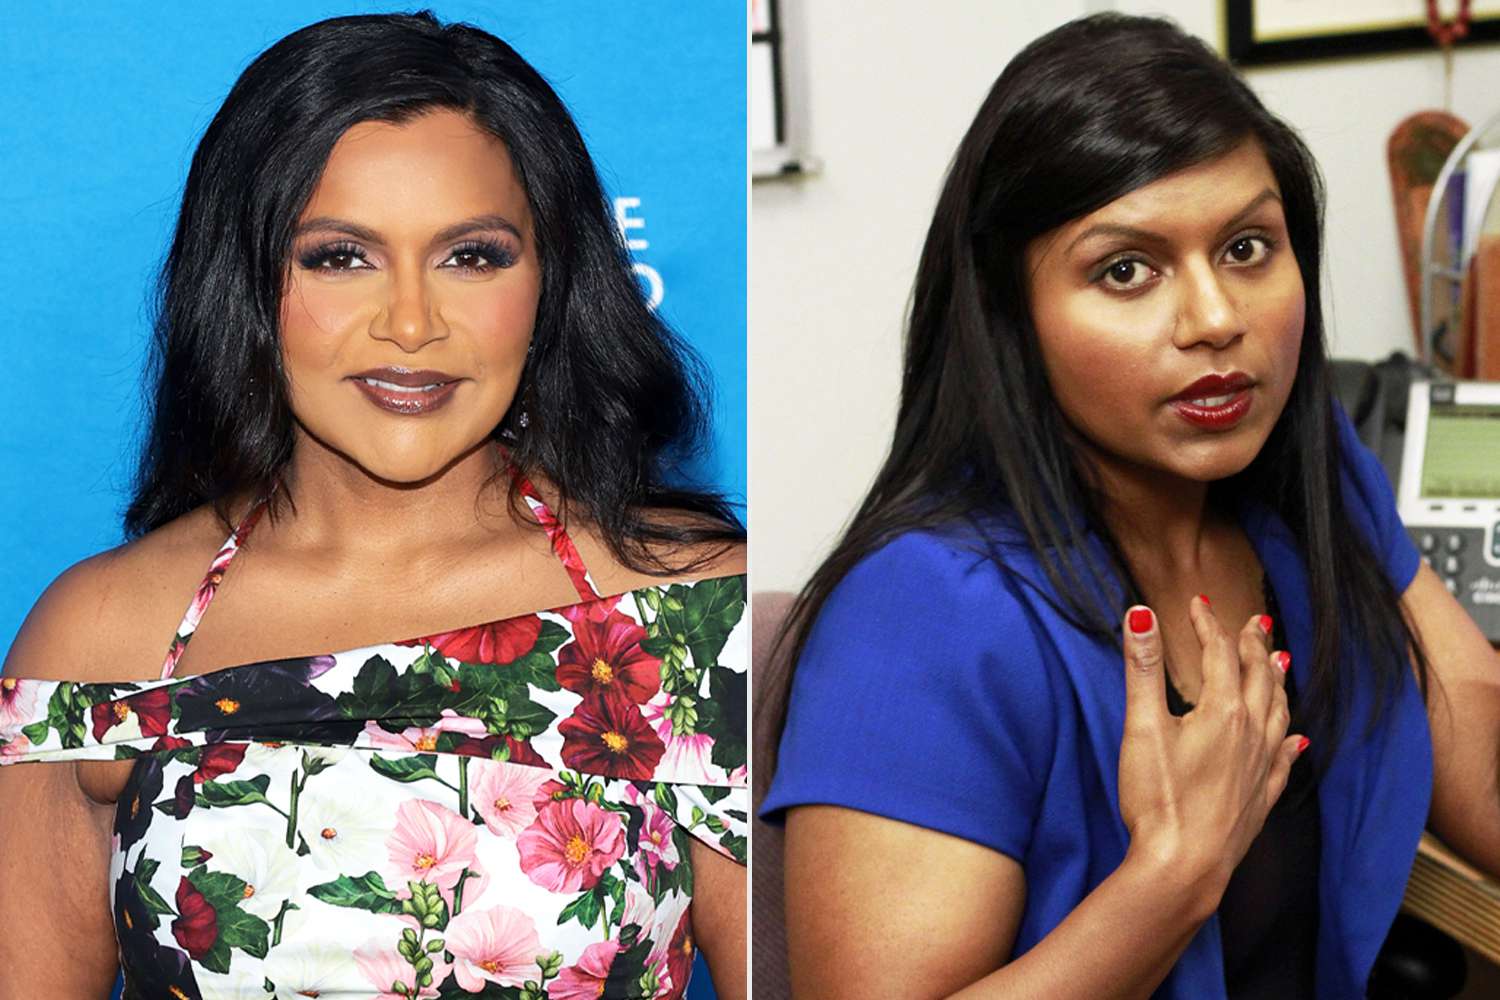 Mindy Kaling Reveals If She'd Ever Reprise Her Role as Kelly Kapoor on “The Office ”Reboot (Exclusive)